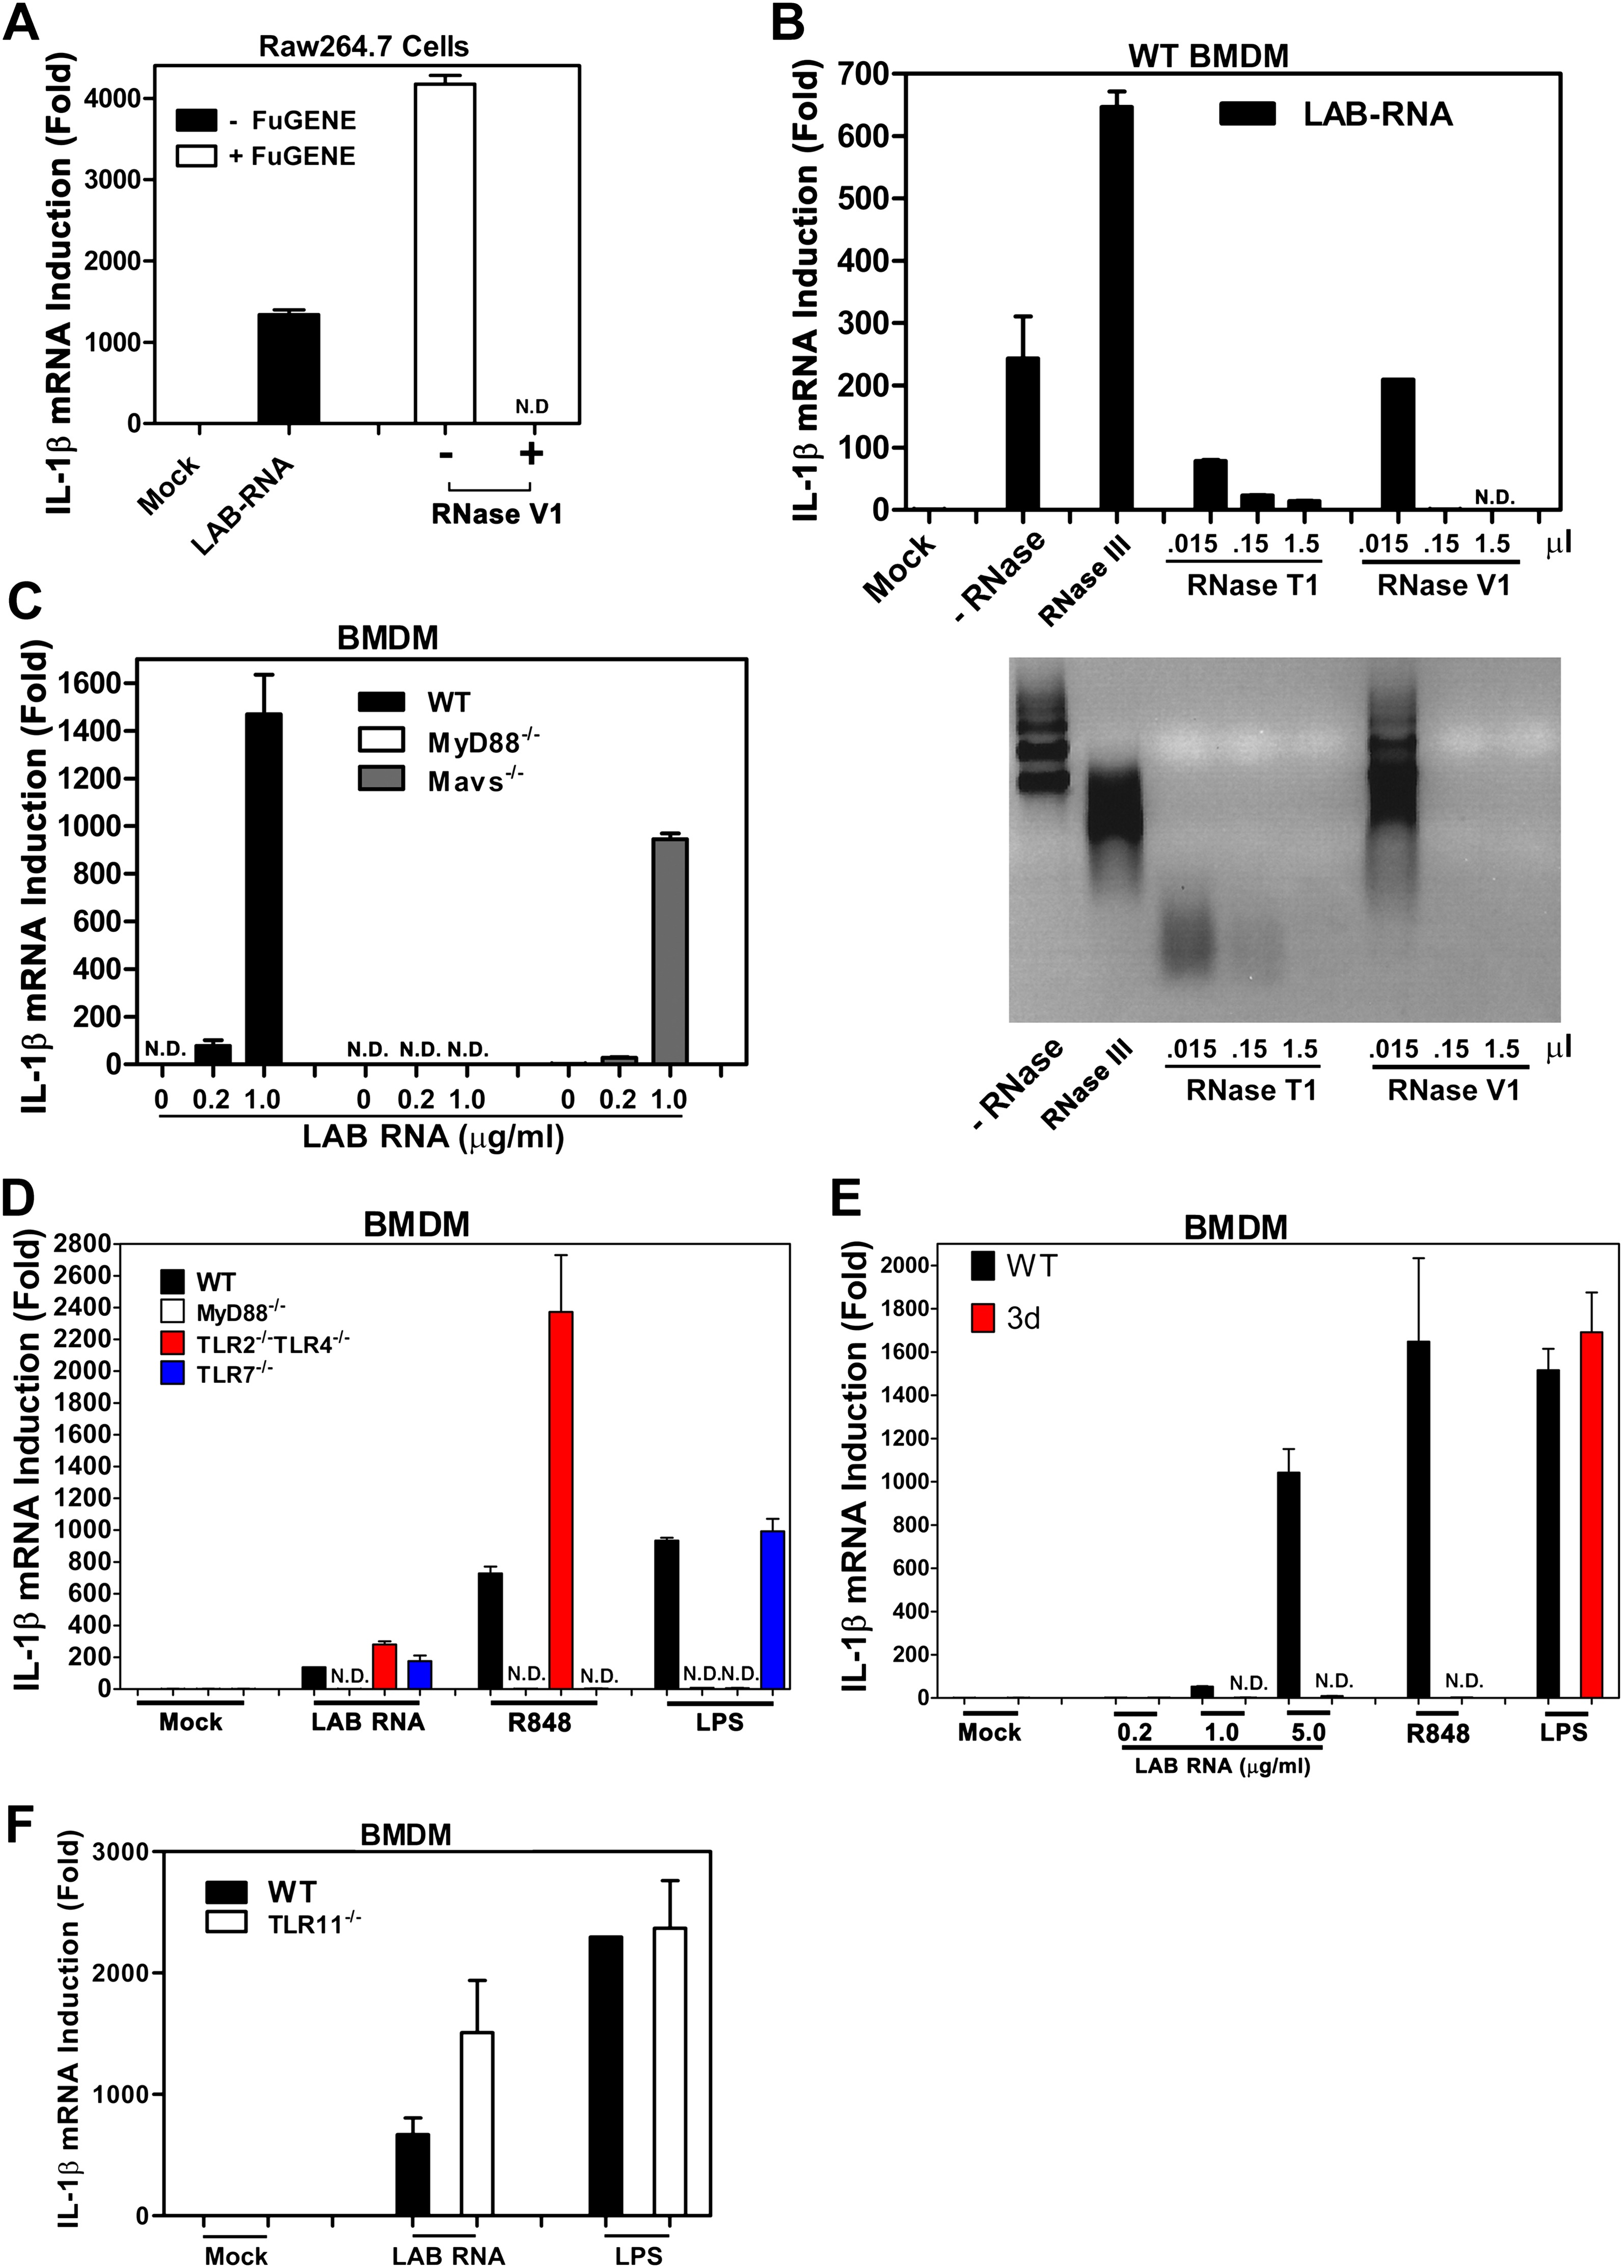 Sequence specific detection of bacterial 23S ribosomal RNA by TLR13                    DNALI1 interacts with the MEIG1/PACRG complex within the manchette and is required for proper sperm flagellum assembly in mice                                      The nutrient-sensing GCN2 signaling pathway is essential for circadian clock function by regulating histone acetylation under amino acid starvation                                      Caveolae and Bin1 form ring-shaped platforms for T-tubule initiation